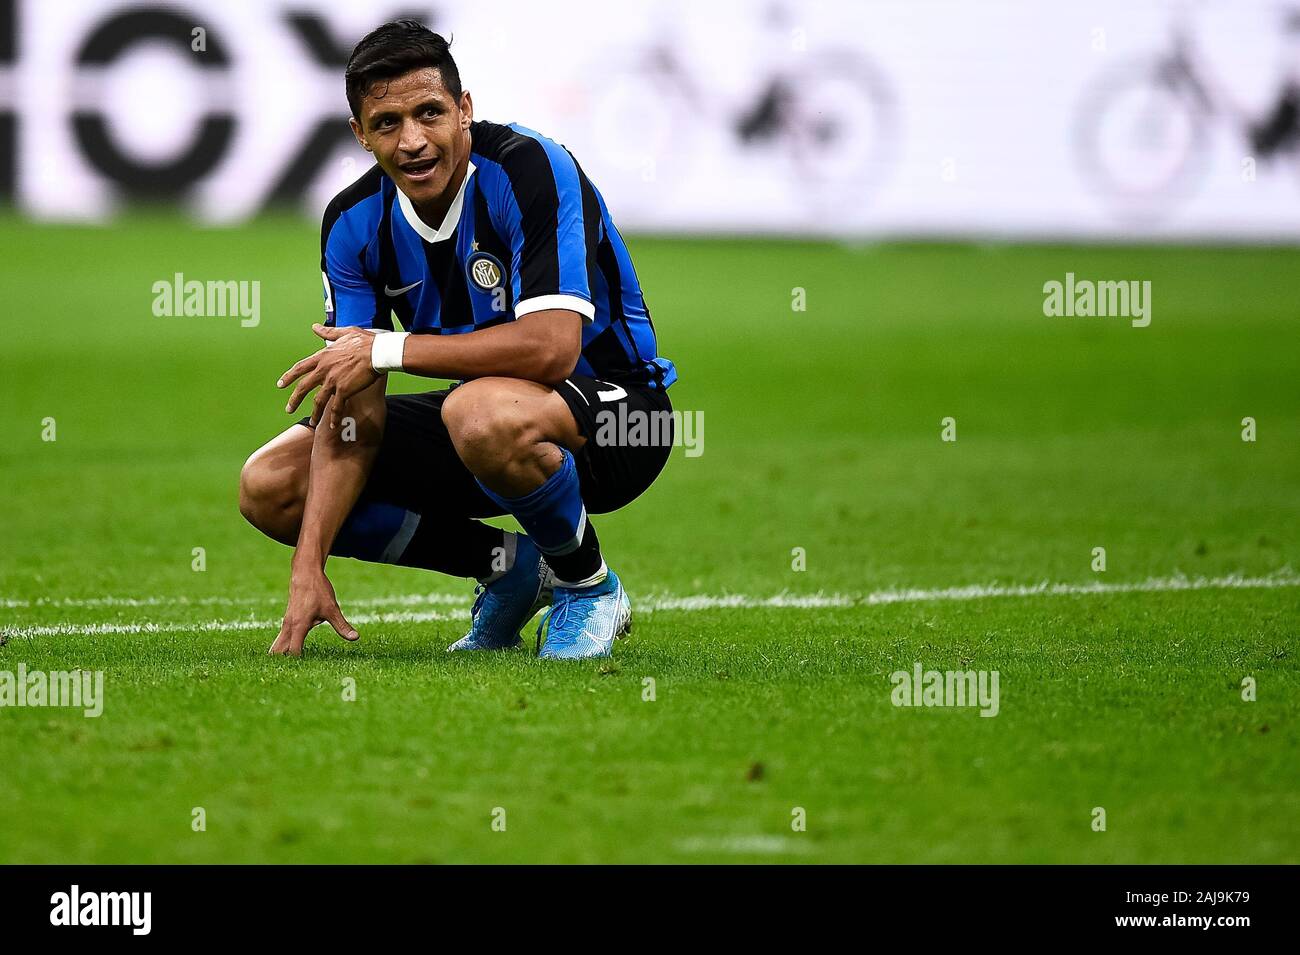 Milan, Italy. 14 September, 2019: Alexis Sanchez looks on during the Serie A football match between FC Internazionale and Udinese Calcio. FC Internazionale won 1-0 over Udinese Calcio. Credit: Nicolò Campo/Alamy Live News Stock Photo